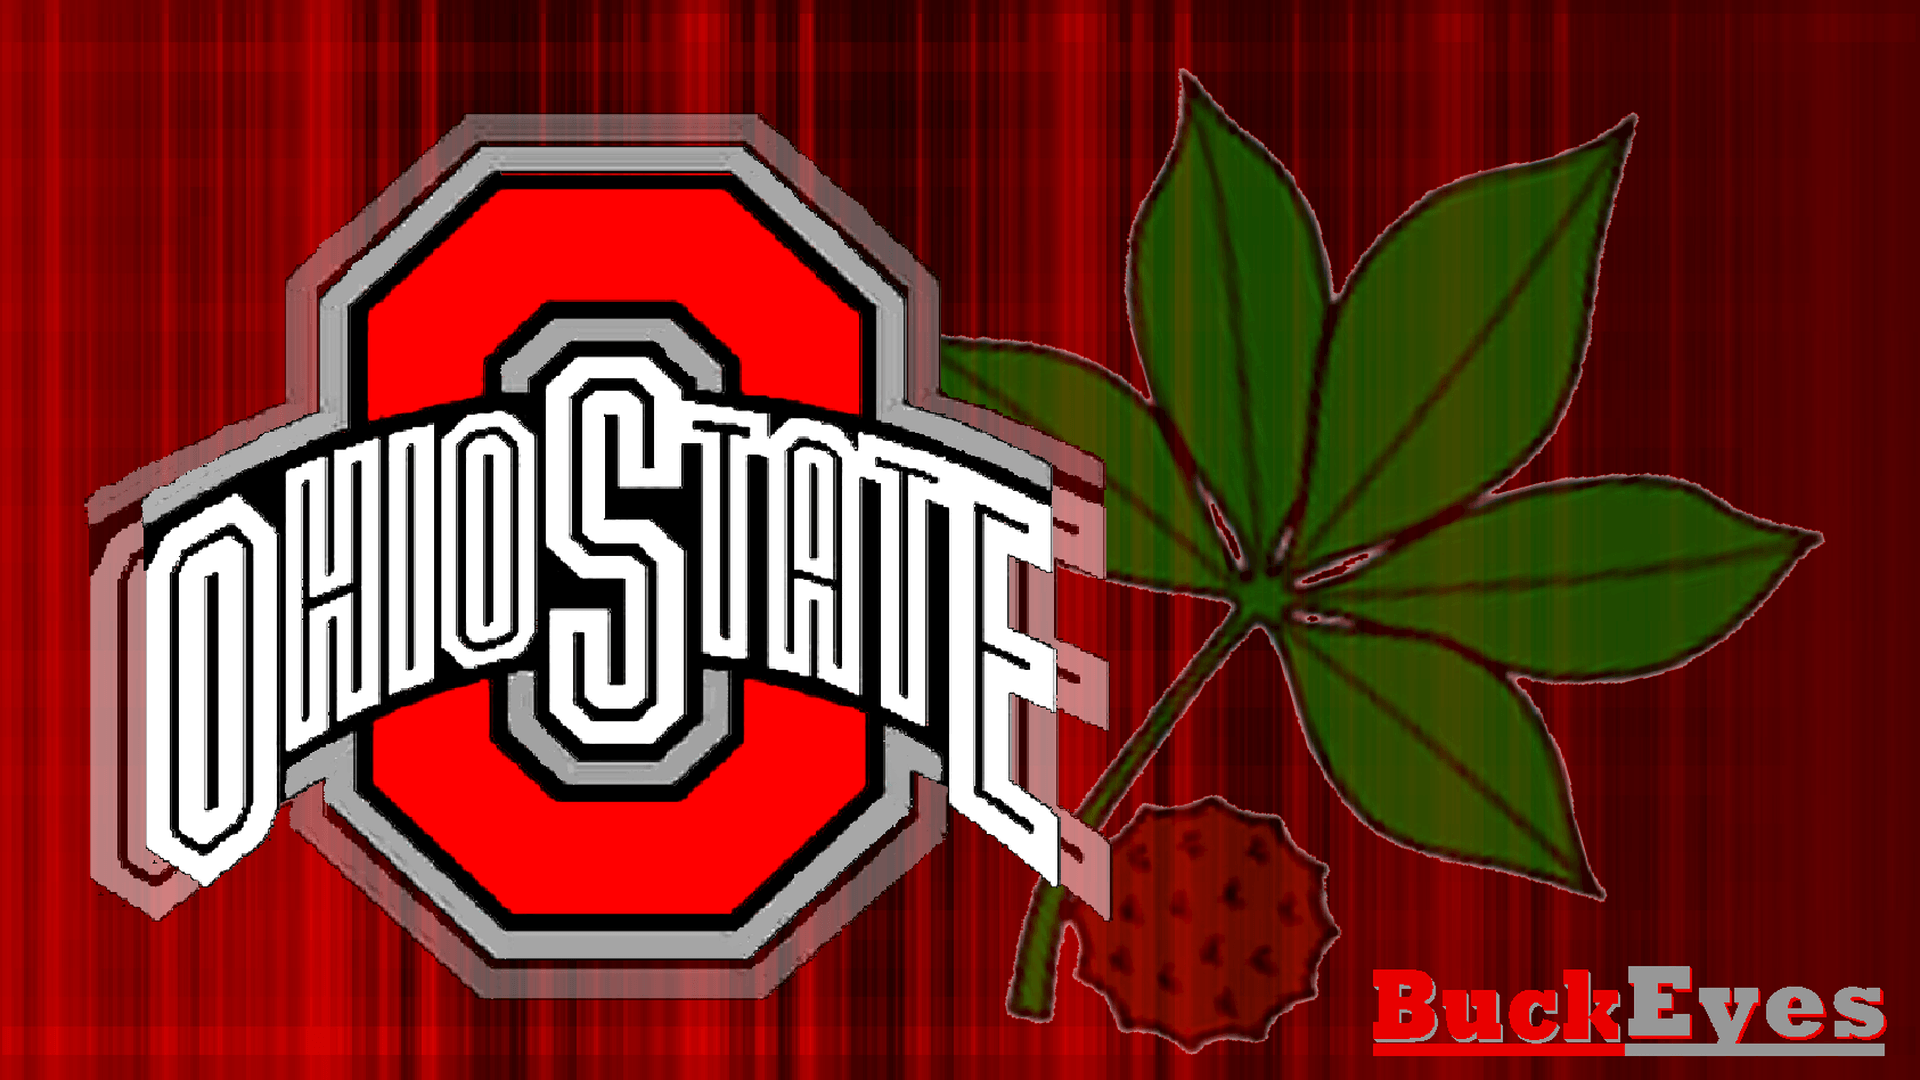 Red Block with White a Logo - Ohio State Buckeyes image RED BLOCK O WHITE OHIO STATE WITH BUCKEYE